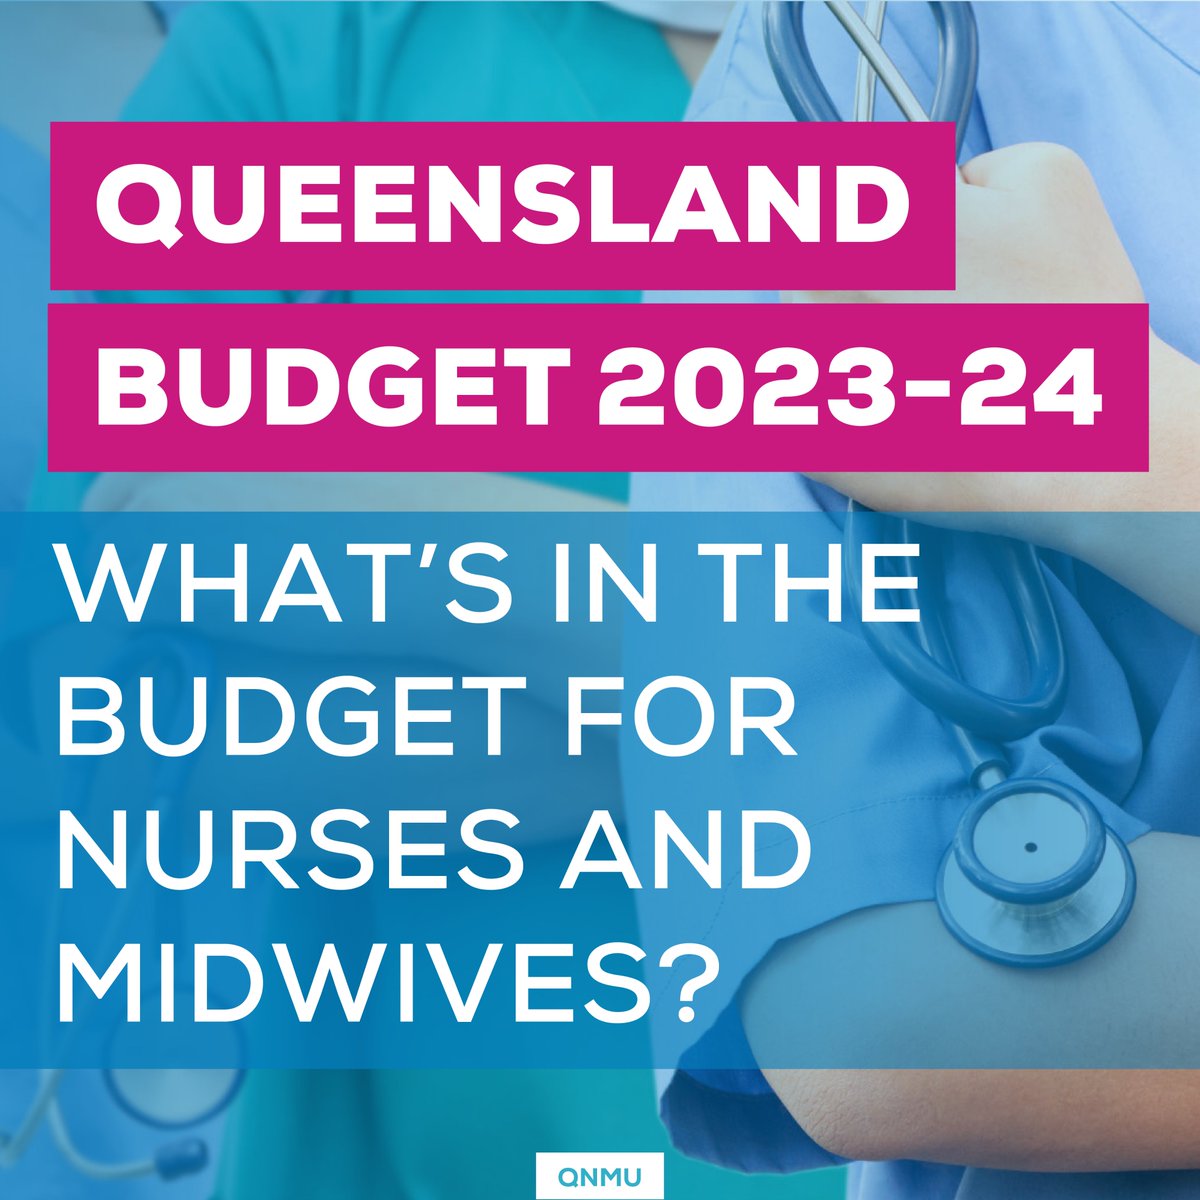 See our full analysis of the 2023-24 Queensland #StateBudget here: bit.ly/3Newc0j